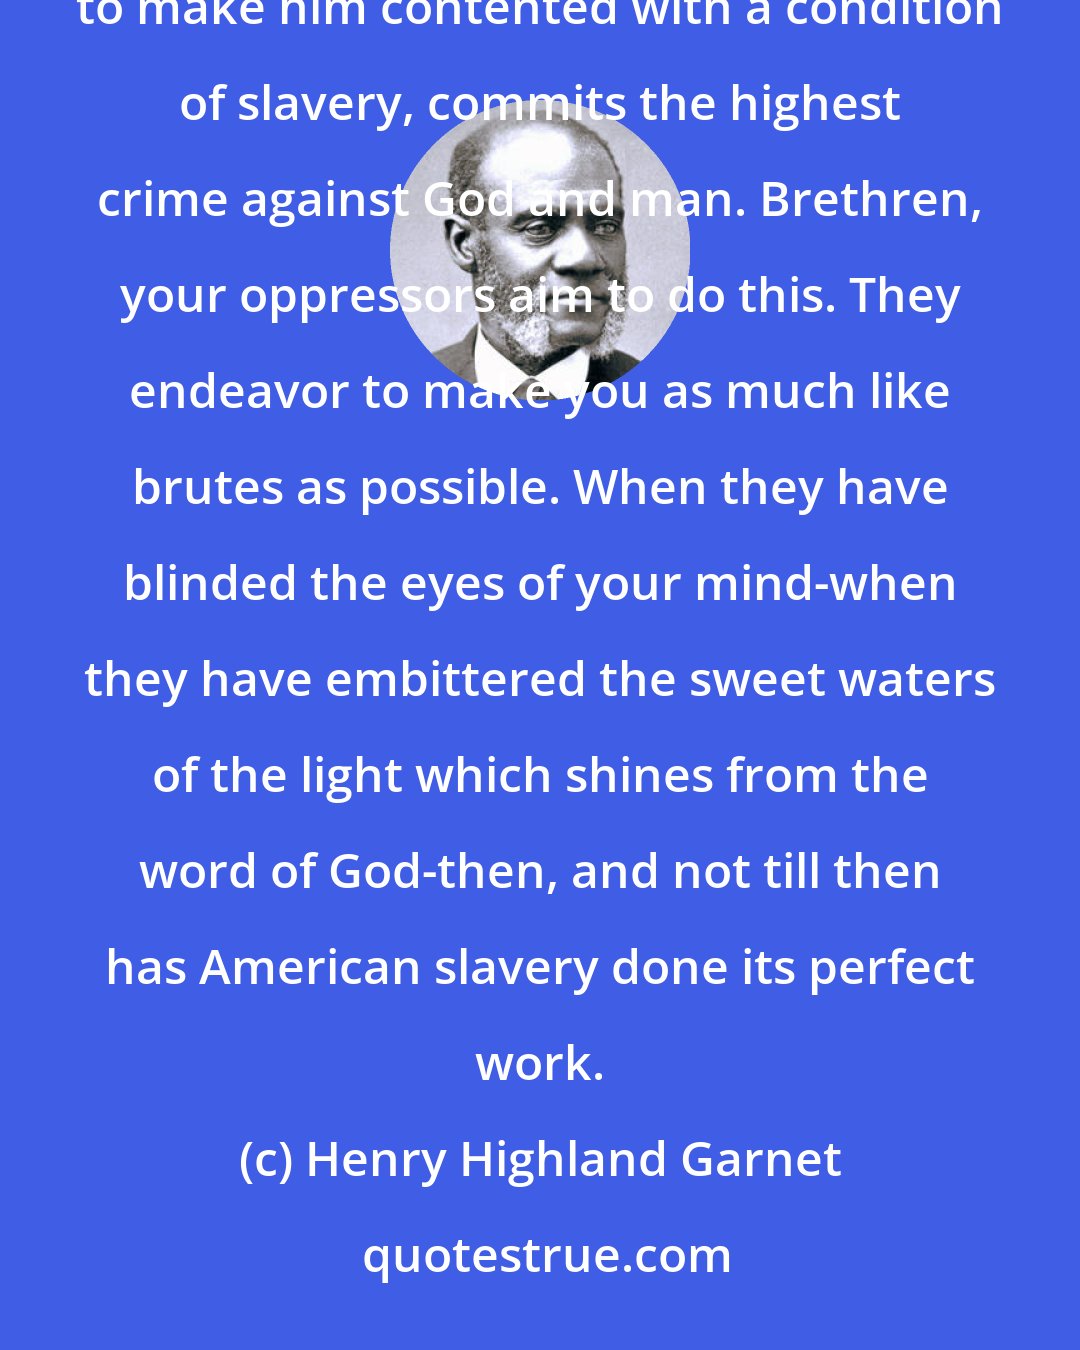 Henry Highland Garnet: In every man's mind the good seeds of liberty are planted, and he who brings his fellow down so low, as to make him contented with a condition of slavery, commits the highest crime against God and man. Brethren, your oppressors aim to do this. They endeavor to make you as much like brutes as possible. When they have blinded the eyes of your mind-when they have embittered the sweet waters of the light which shines from the word of God-then, and not till then has American slavery done its perfect work.